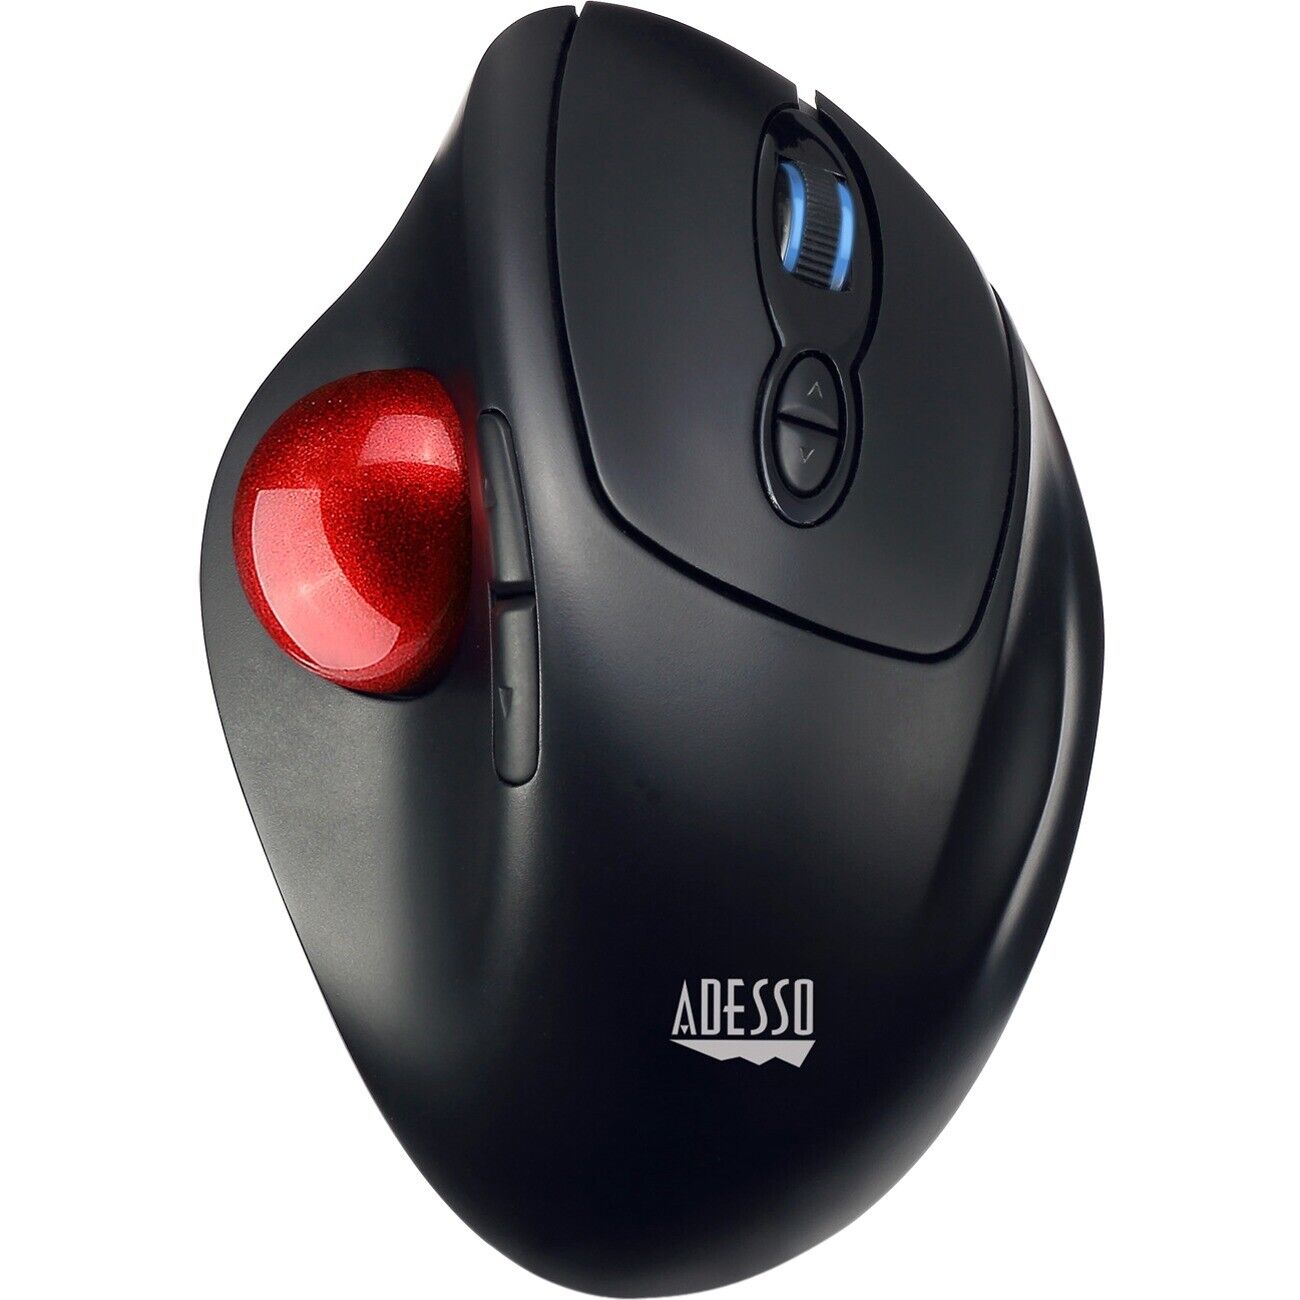 Adesso iMouse T30 - 2.4 GHz Wireless 4 Button Desktop Trackball (imouset30)